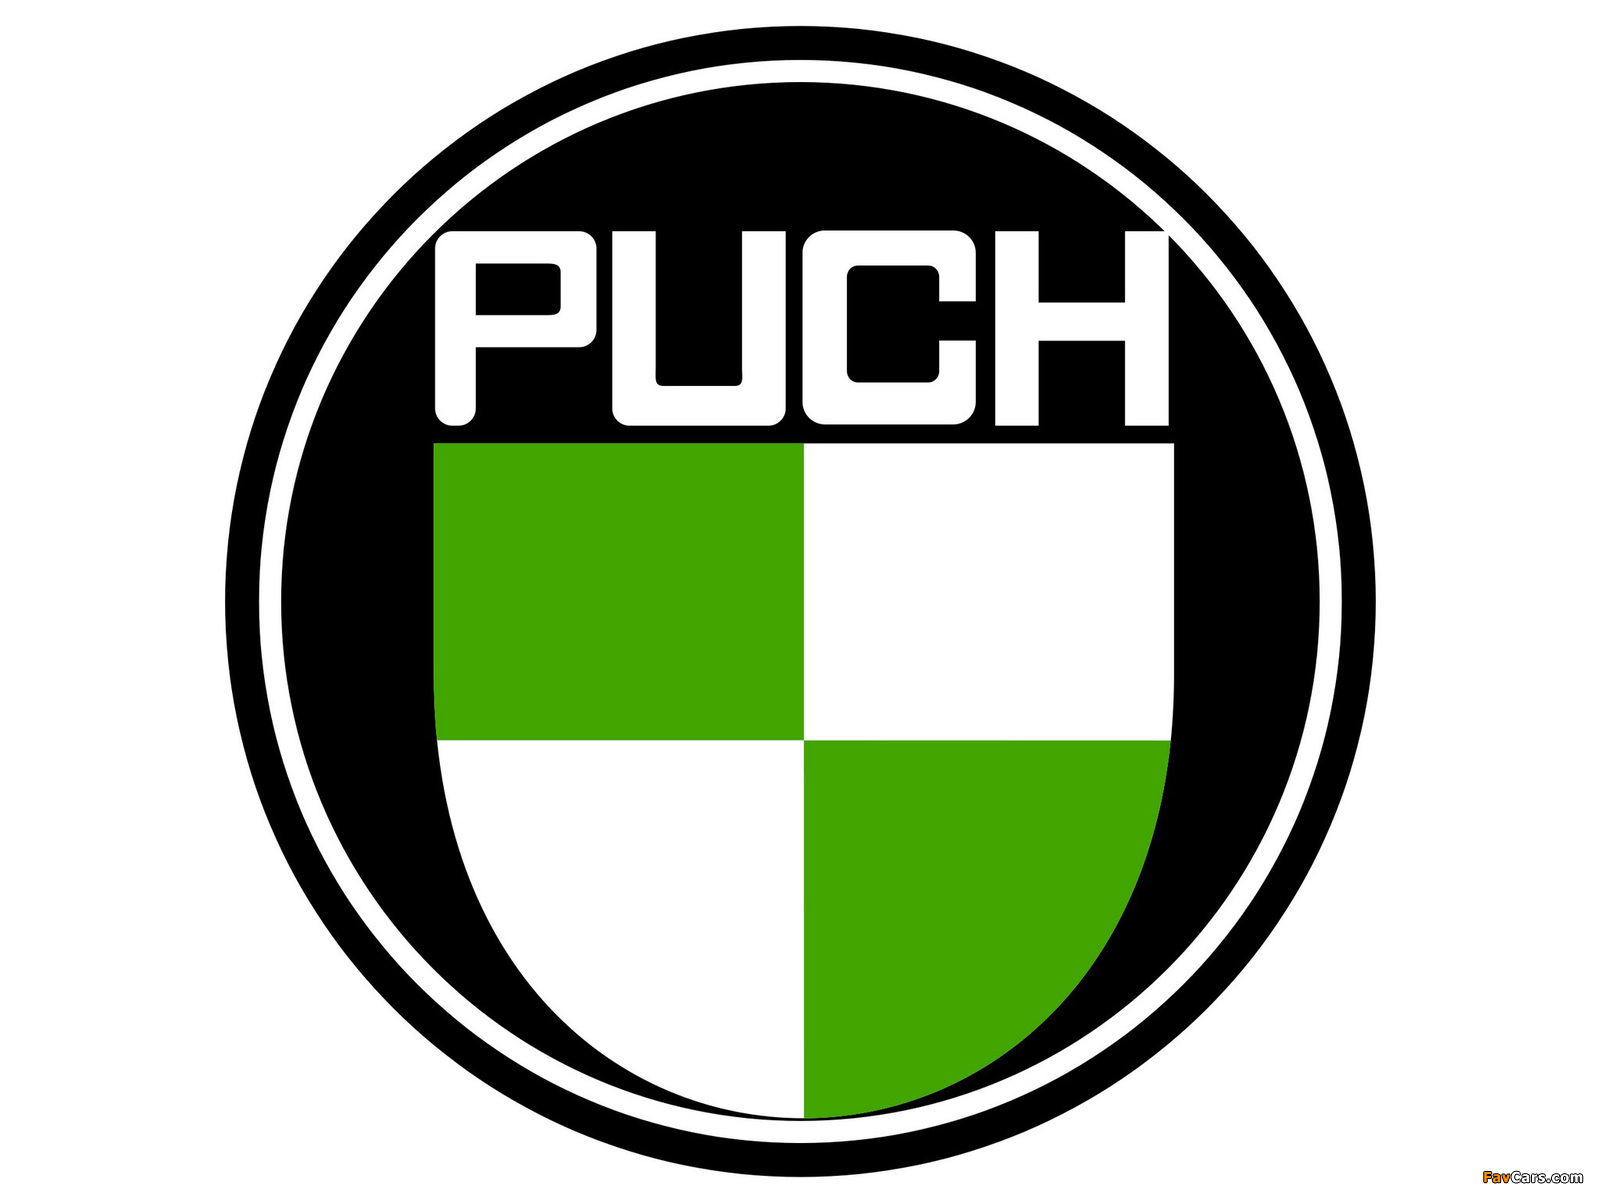 Puch images (1600 x 1200)